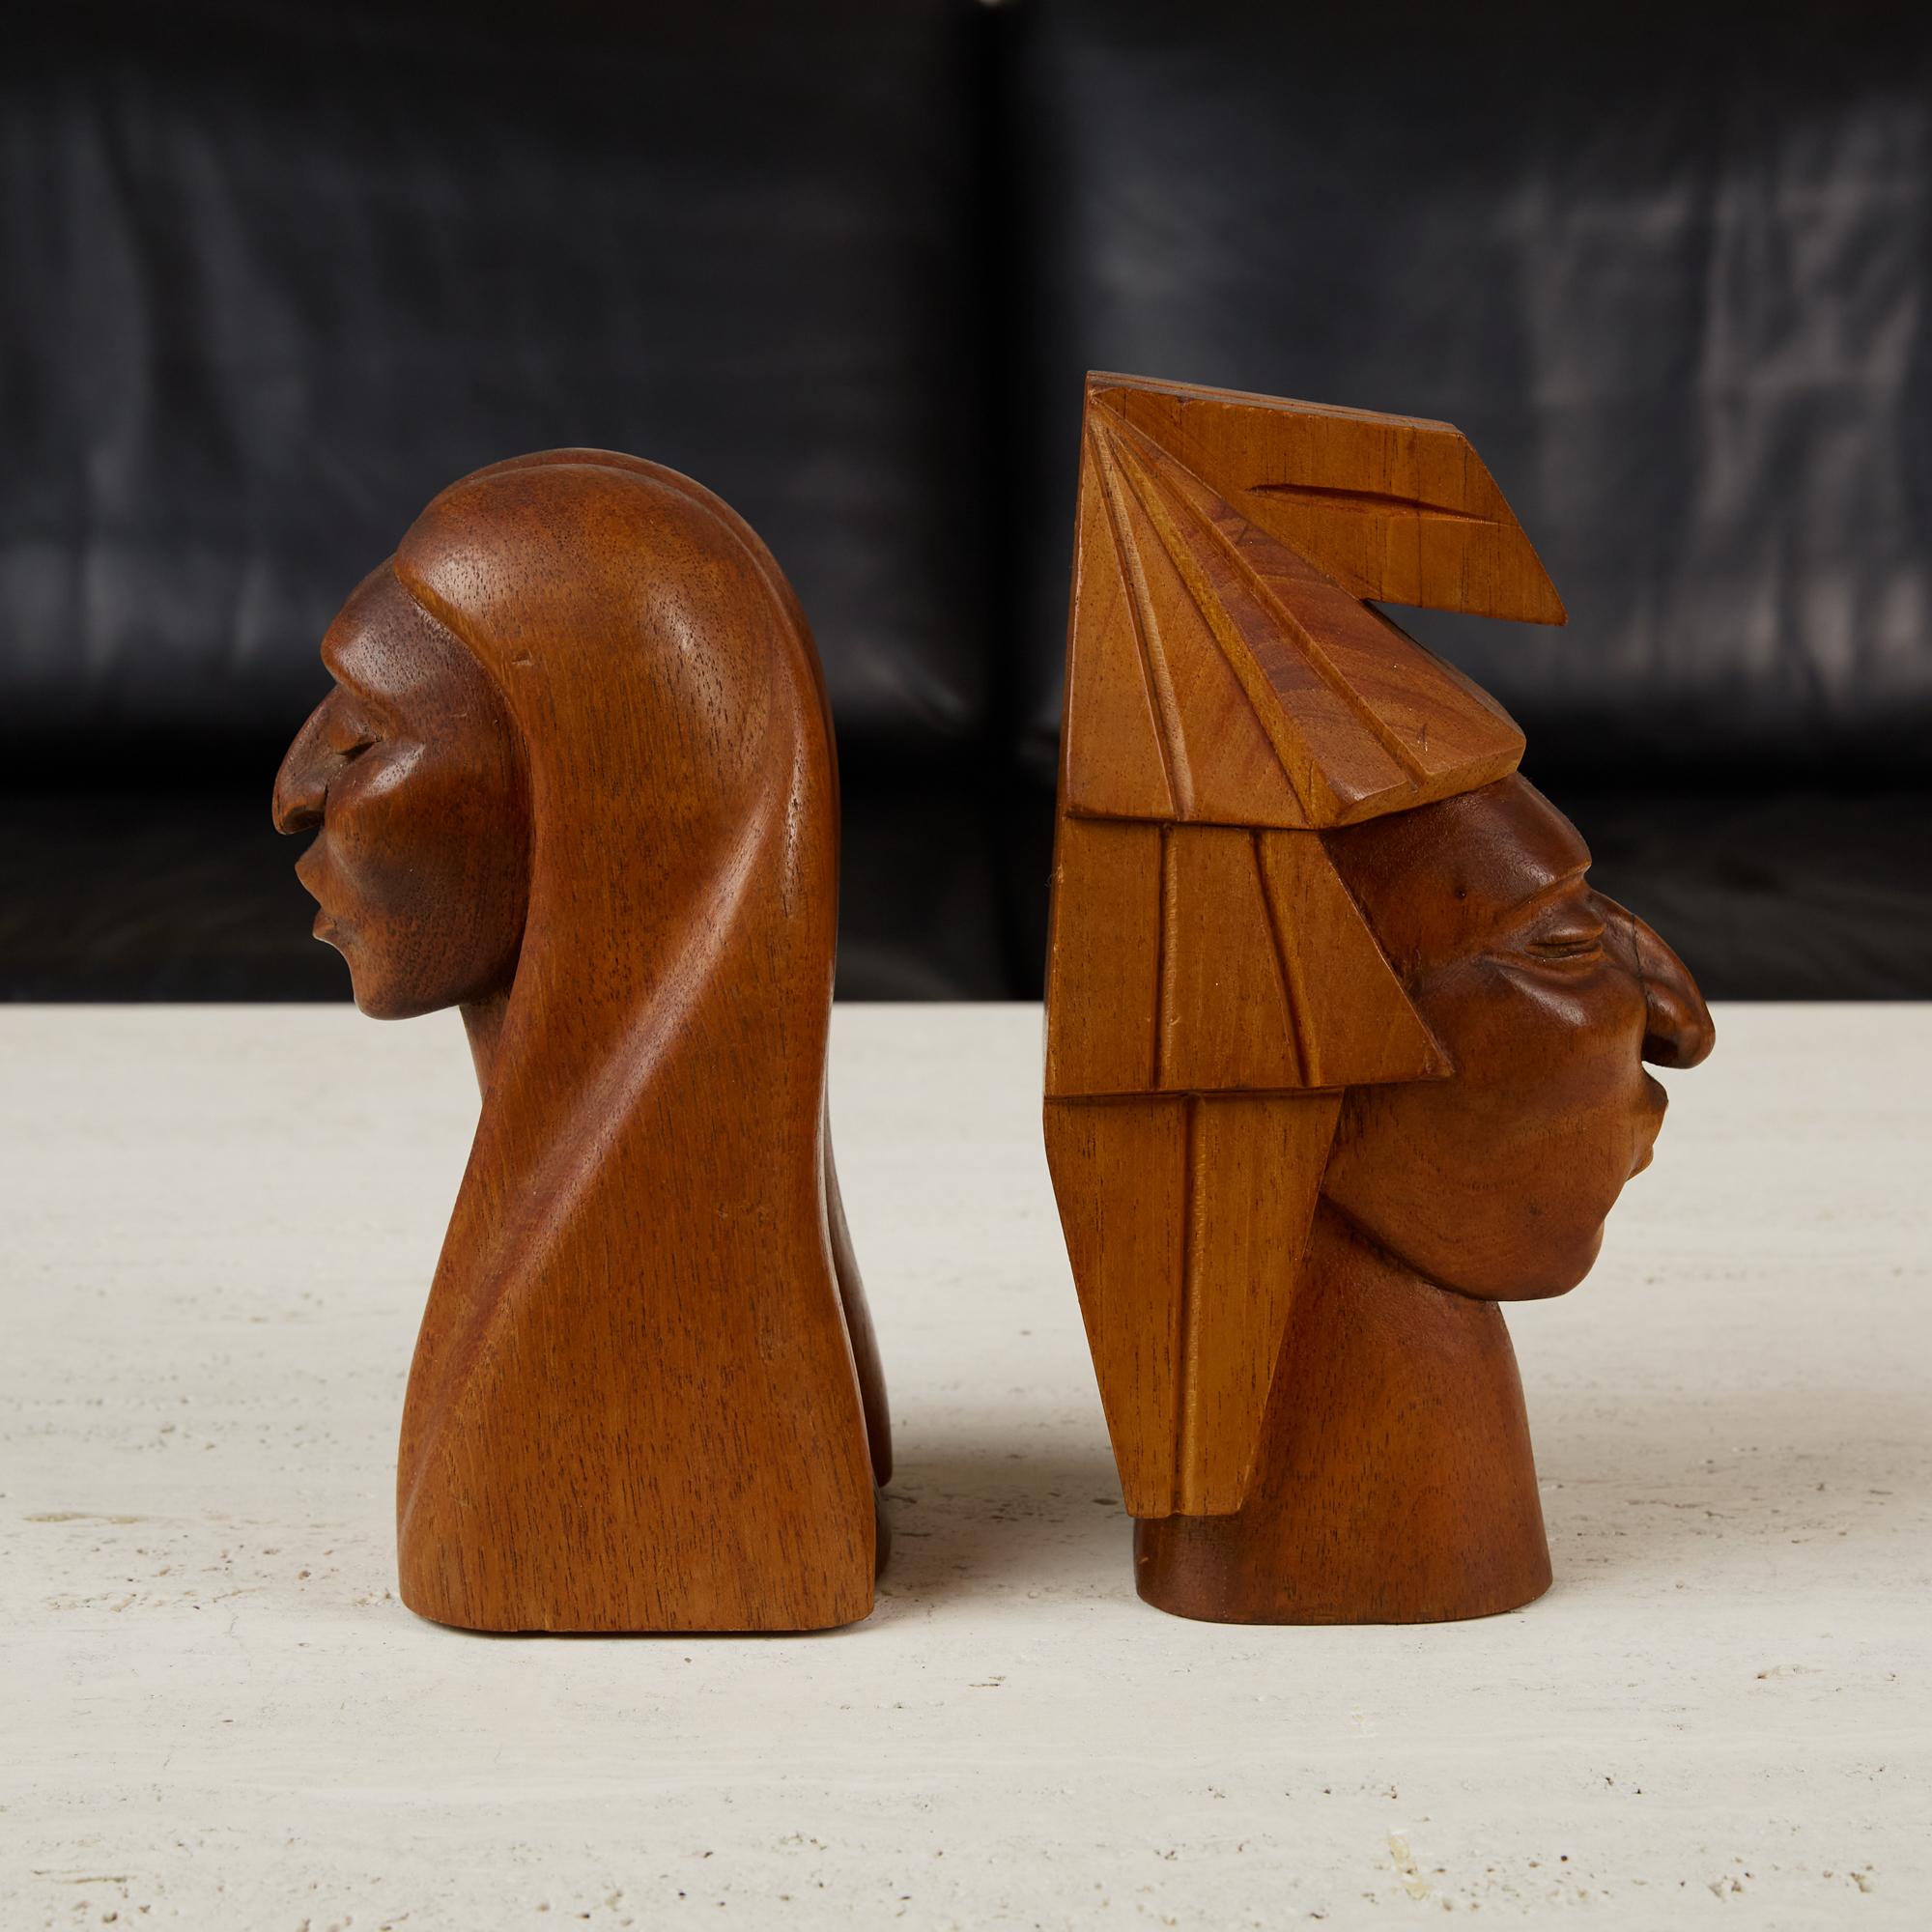 Pair of Wooden Native American Busts In Excellent Condition For Sale In Los Angeles, CA